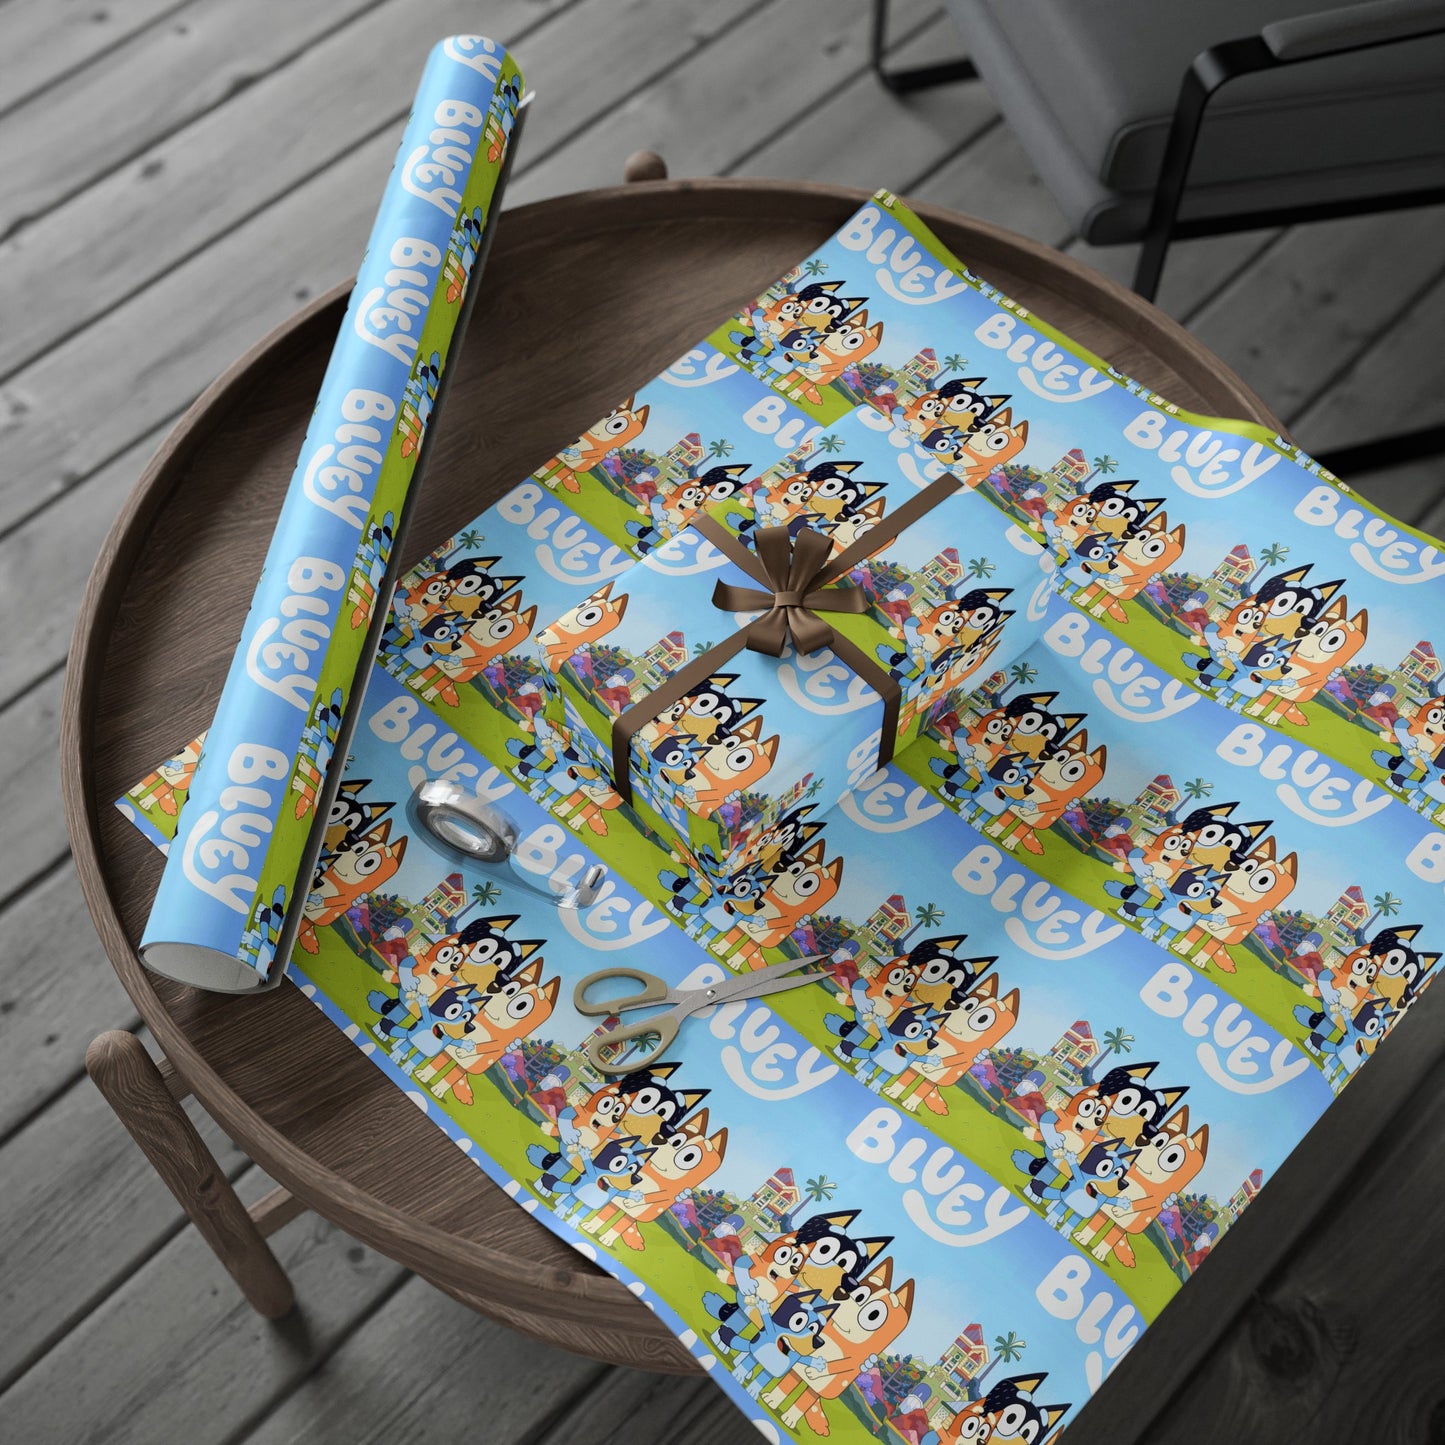 Bluey Childrens TV Show Cartoon Birthday High Def Gift Wrapping Paper